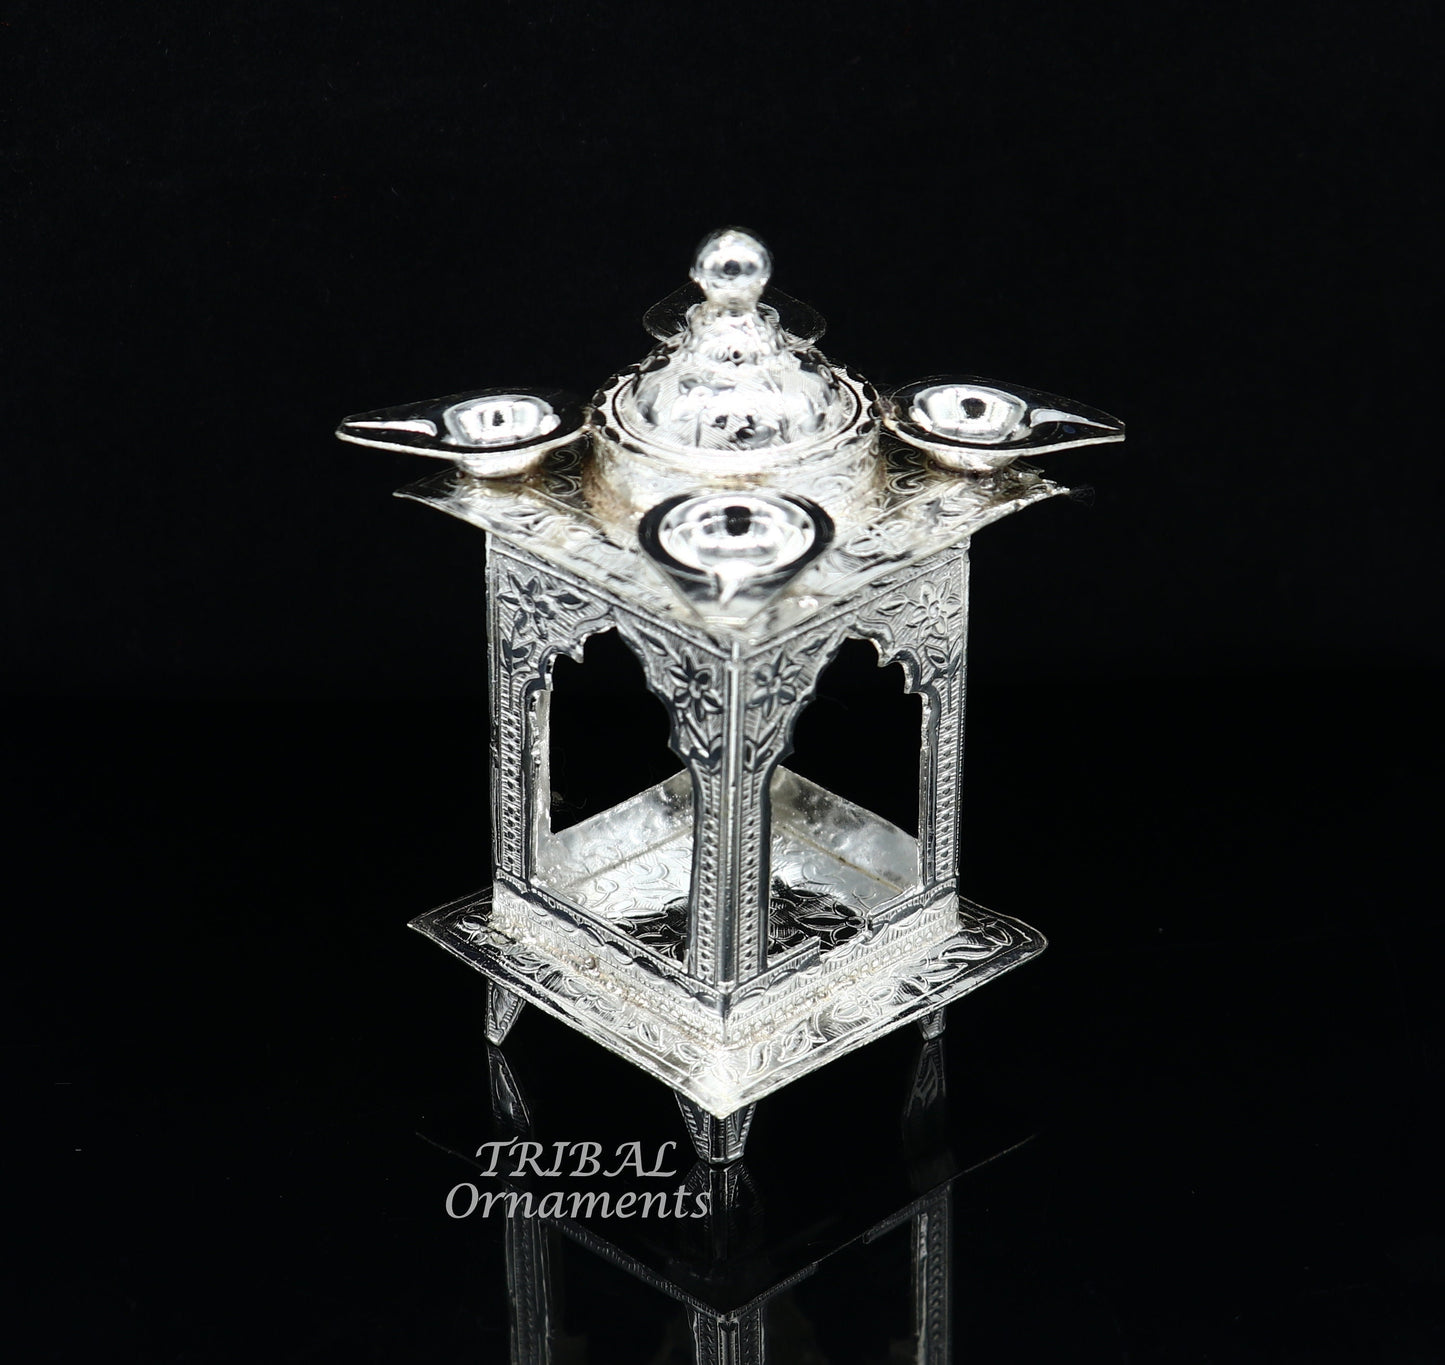 925 sterling silver handmade vintage design chattri temple lamp best puja article with 4 lamp on it, best home temple decor utensils su809 - TRIBAL ORNAMENTS